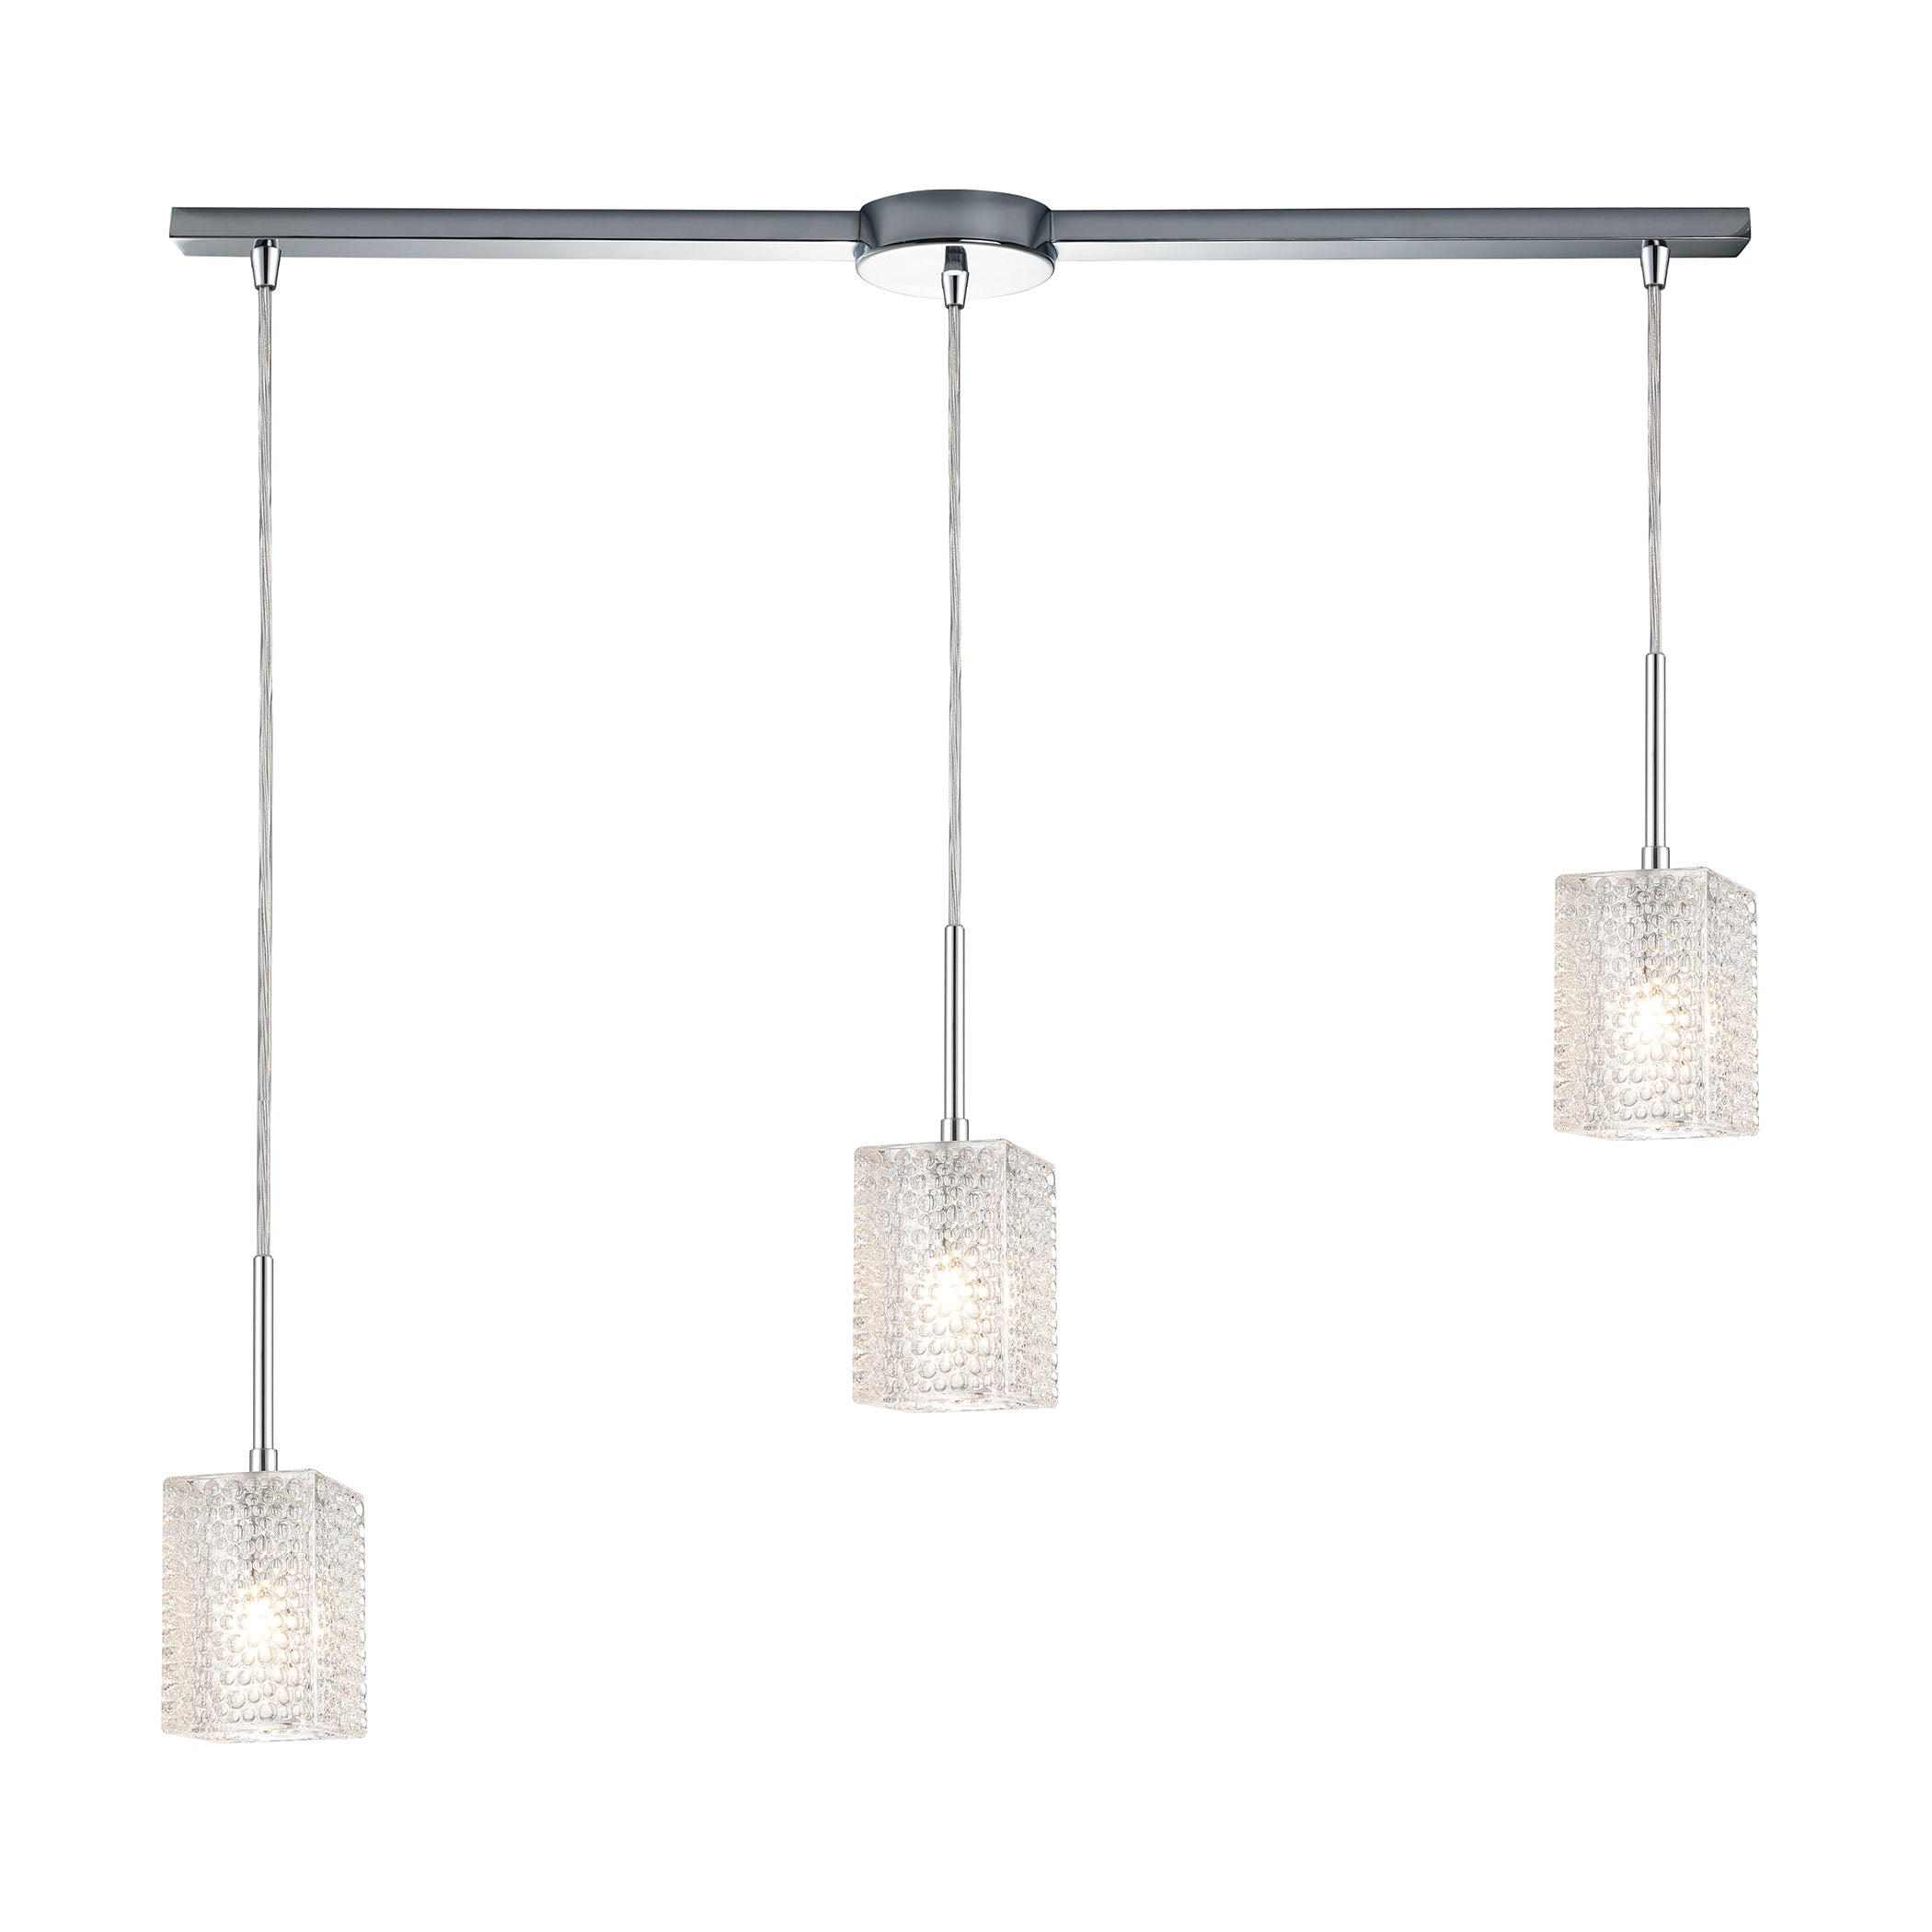 ELK Lighting 17434/3L Ezra 3-Light Linear Mini Pendant Fixture in Polished Chrome with Textured Clear Crystal